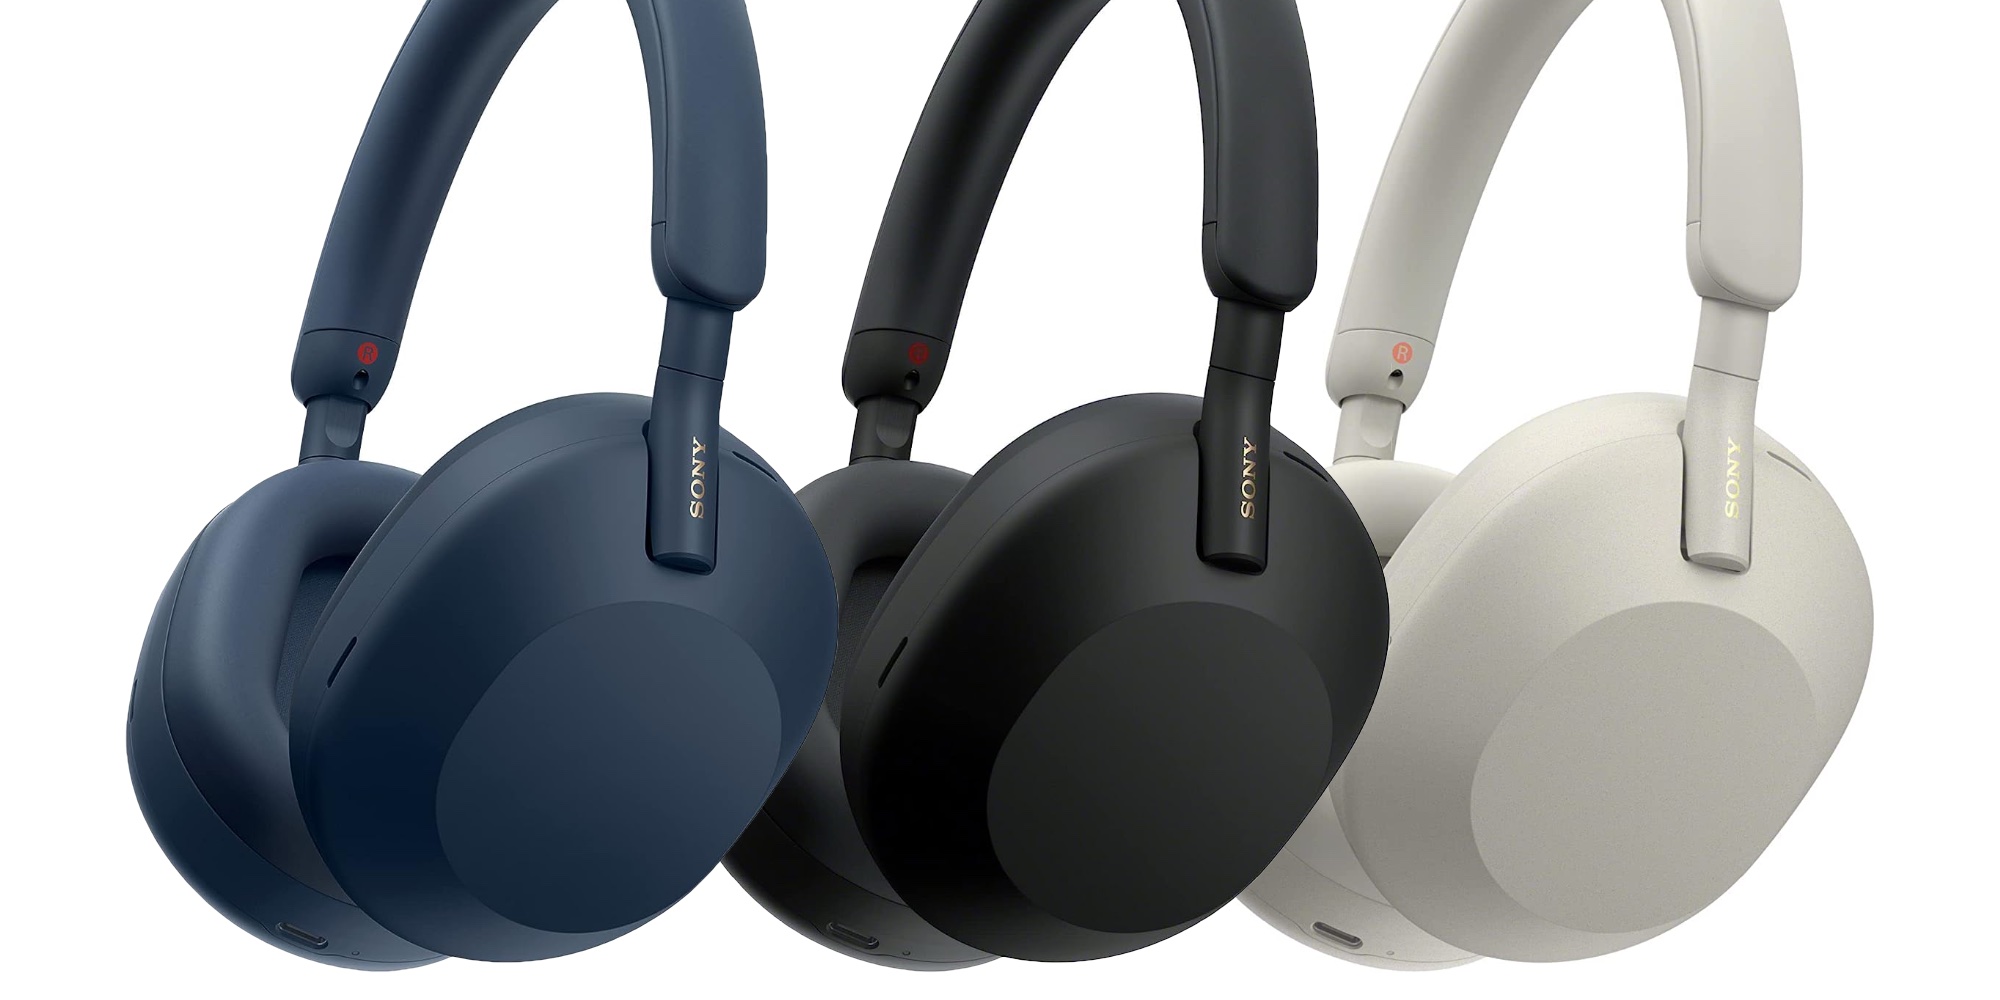 Sony's XM5 headphones are over $100 off thanks to 's New